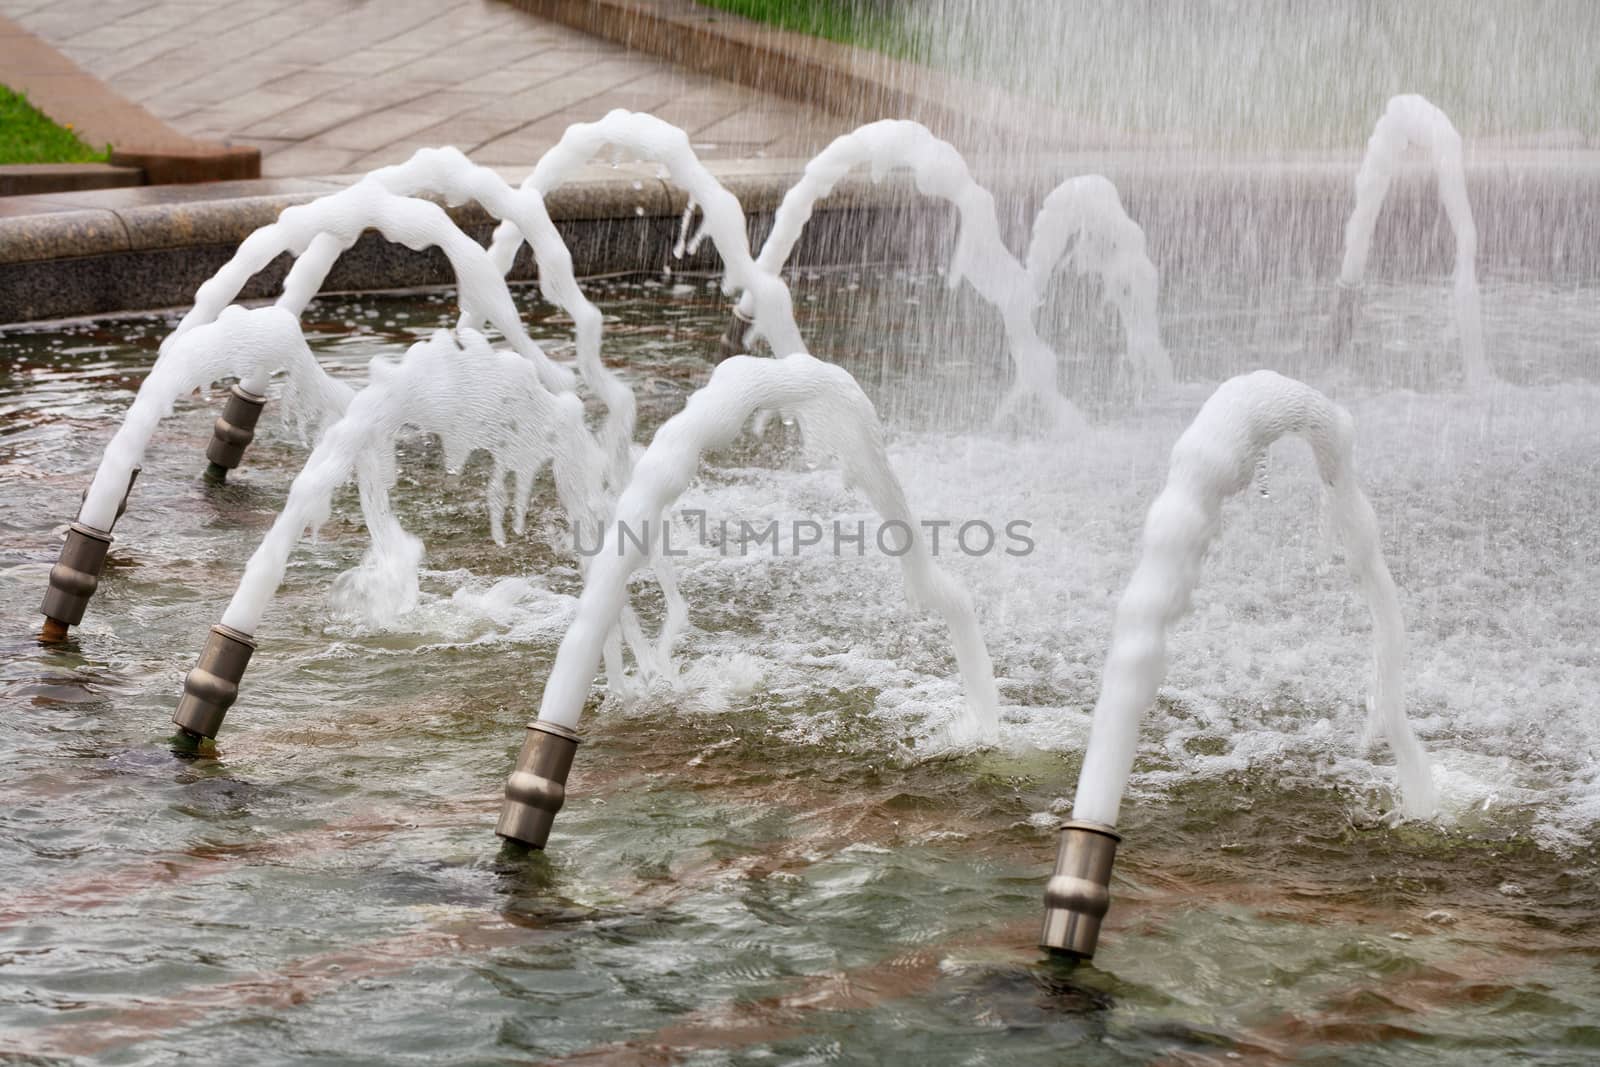 Foaming jets of water in the city's polished granite fountain gush out from metal cannons. by Sergii